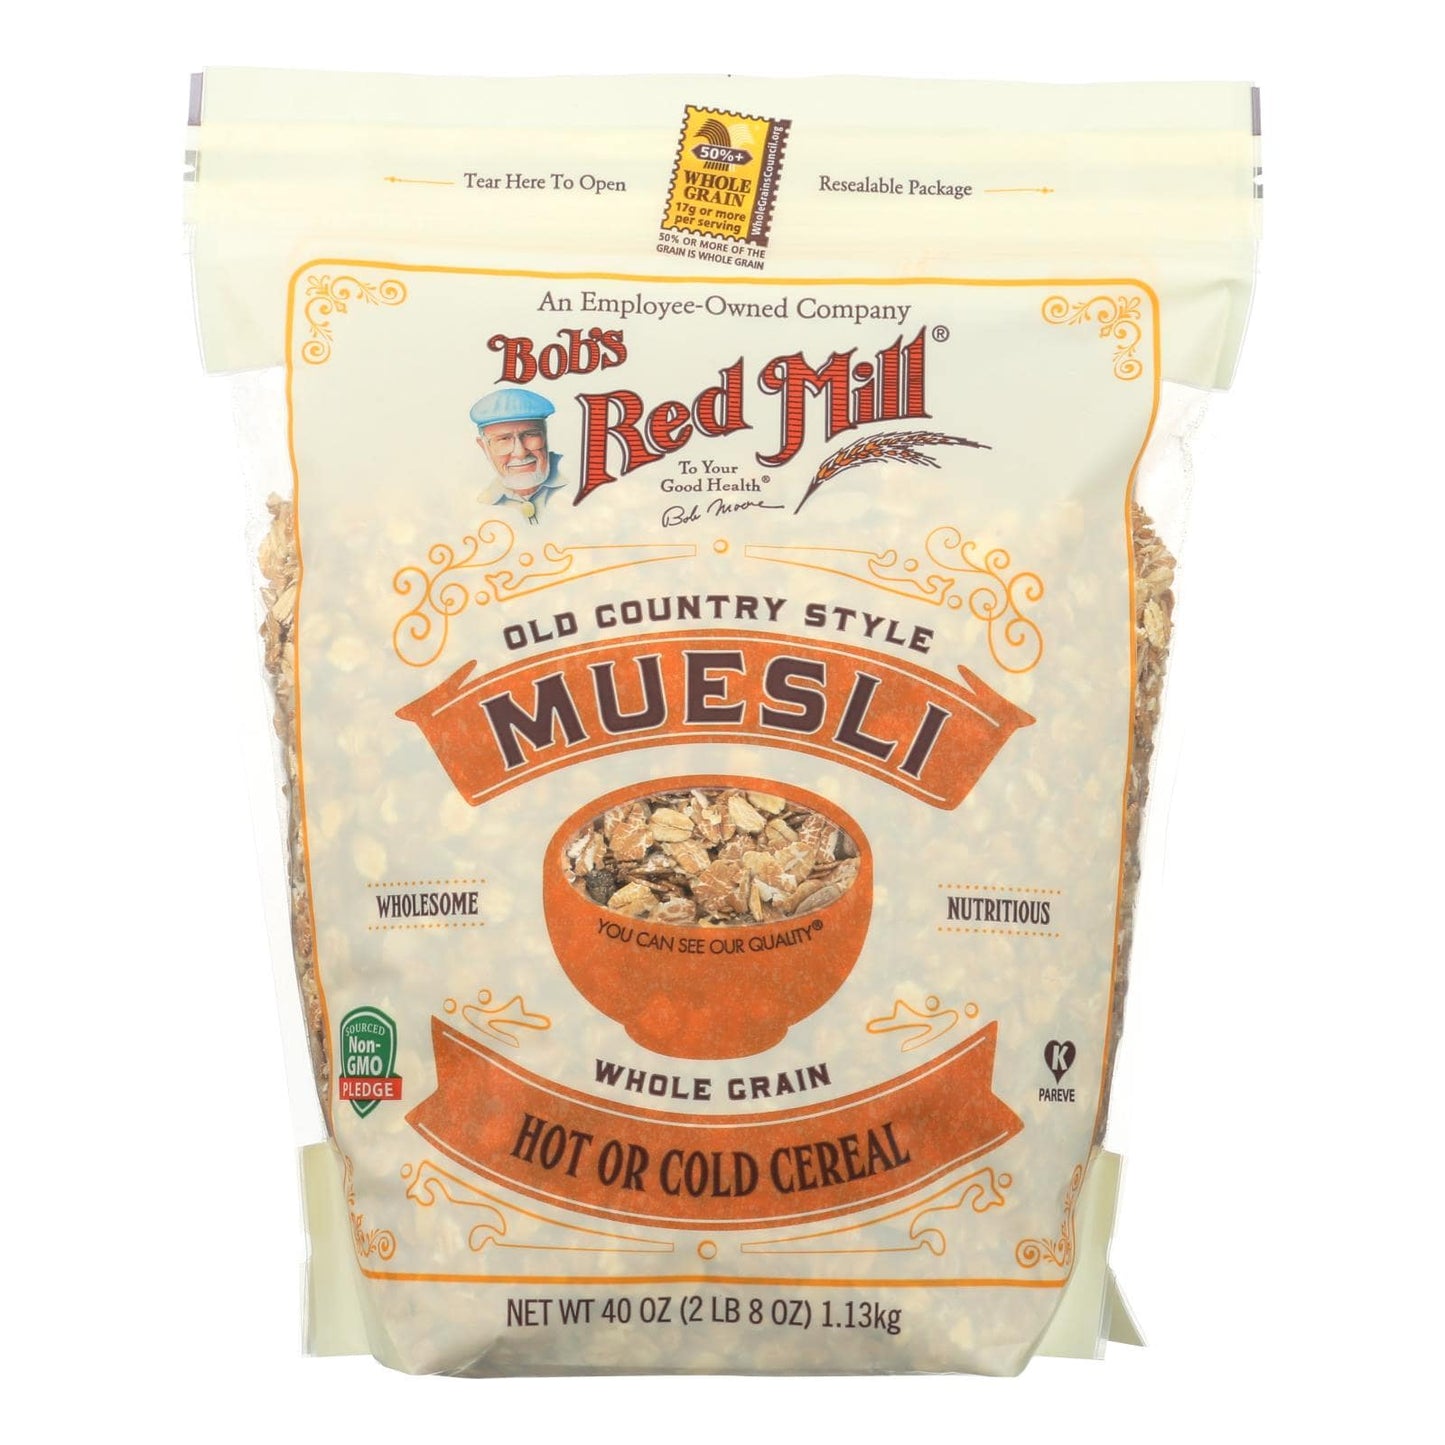 Bob's Red Mill - Cereal - Muesli - Hot Or Cold - Case Of 4 - 40 Oz | OnlyNaturals.us